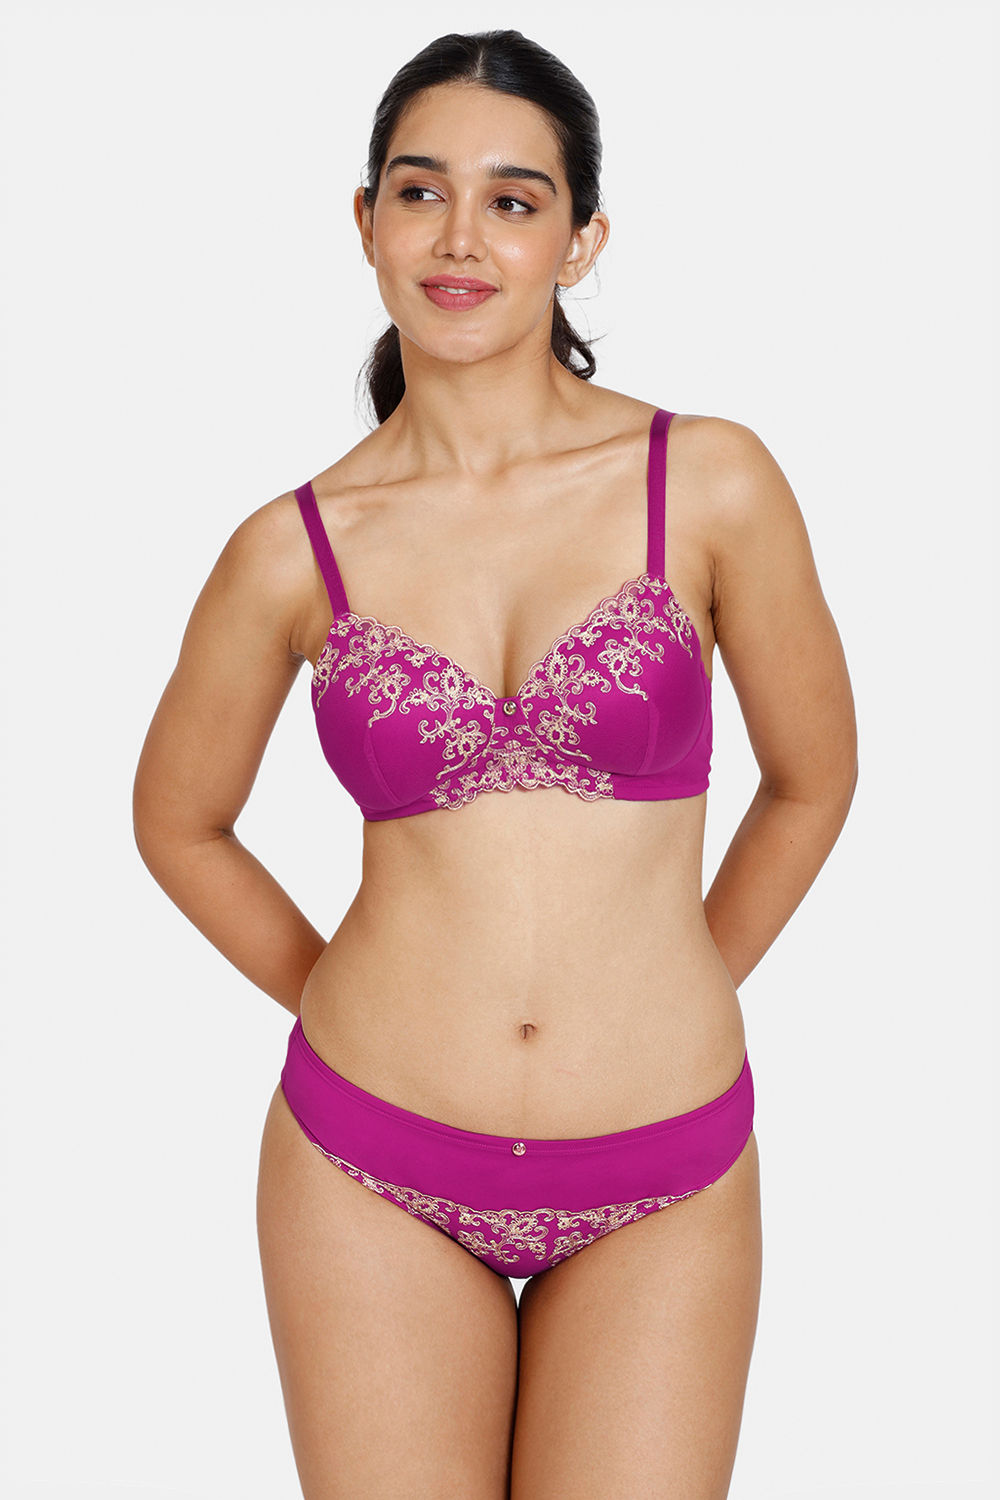 https://cdn.zivame.com/ik-seo/media/catalog/product/1/_/1_65_79/zivame-bejweled-padded-non-wired-3-4th-coverage-lace-bra-with-hipster-panty-festival-fuchsia.jpg